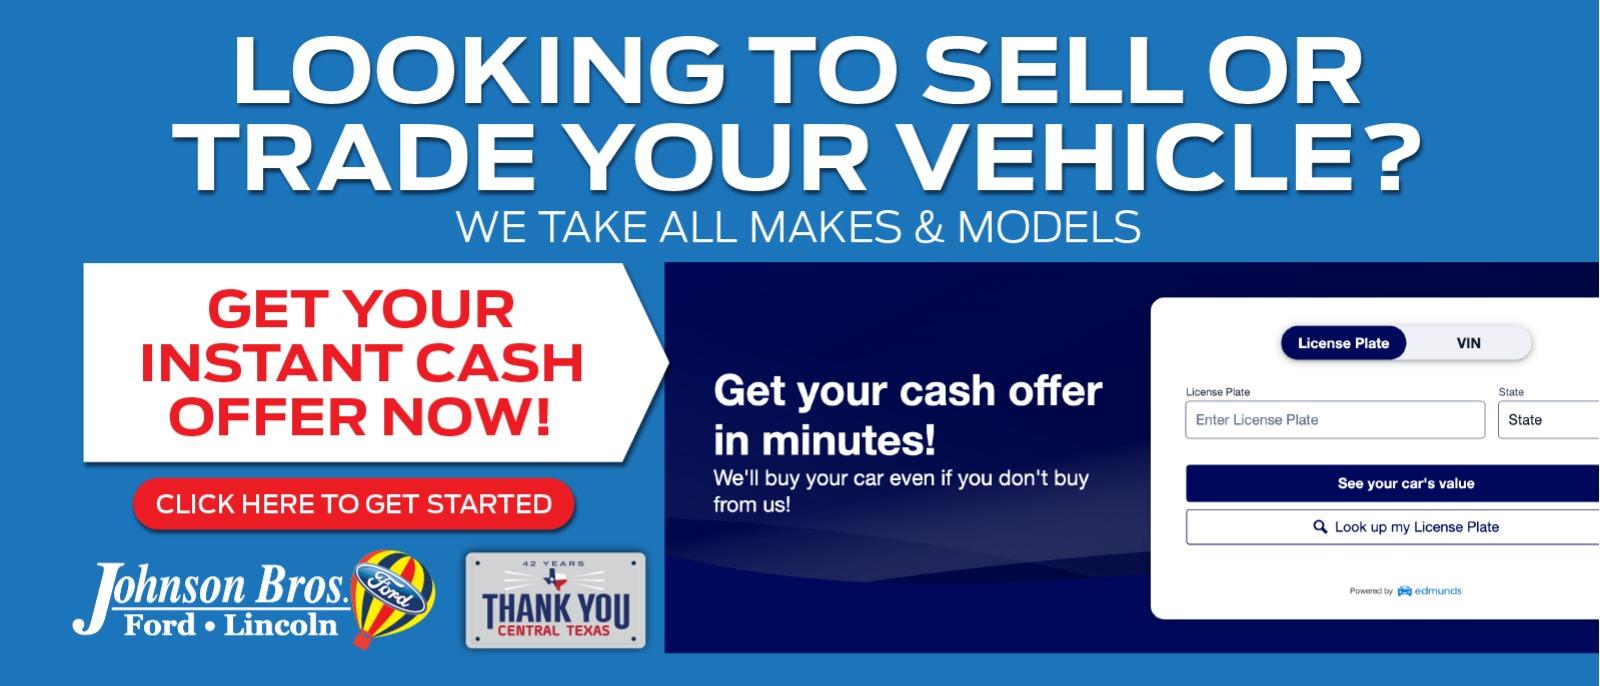 Looking To Sell Or Trade Your Vehicle? 
Get your instant cash offer now!